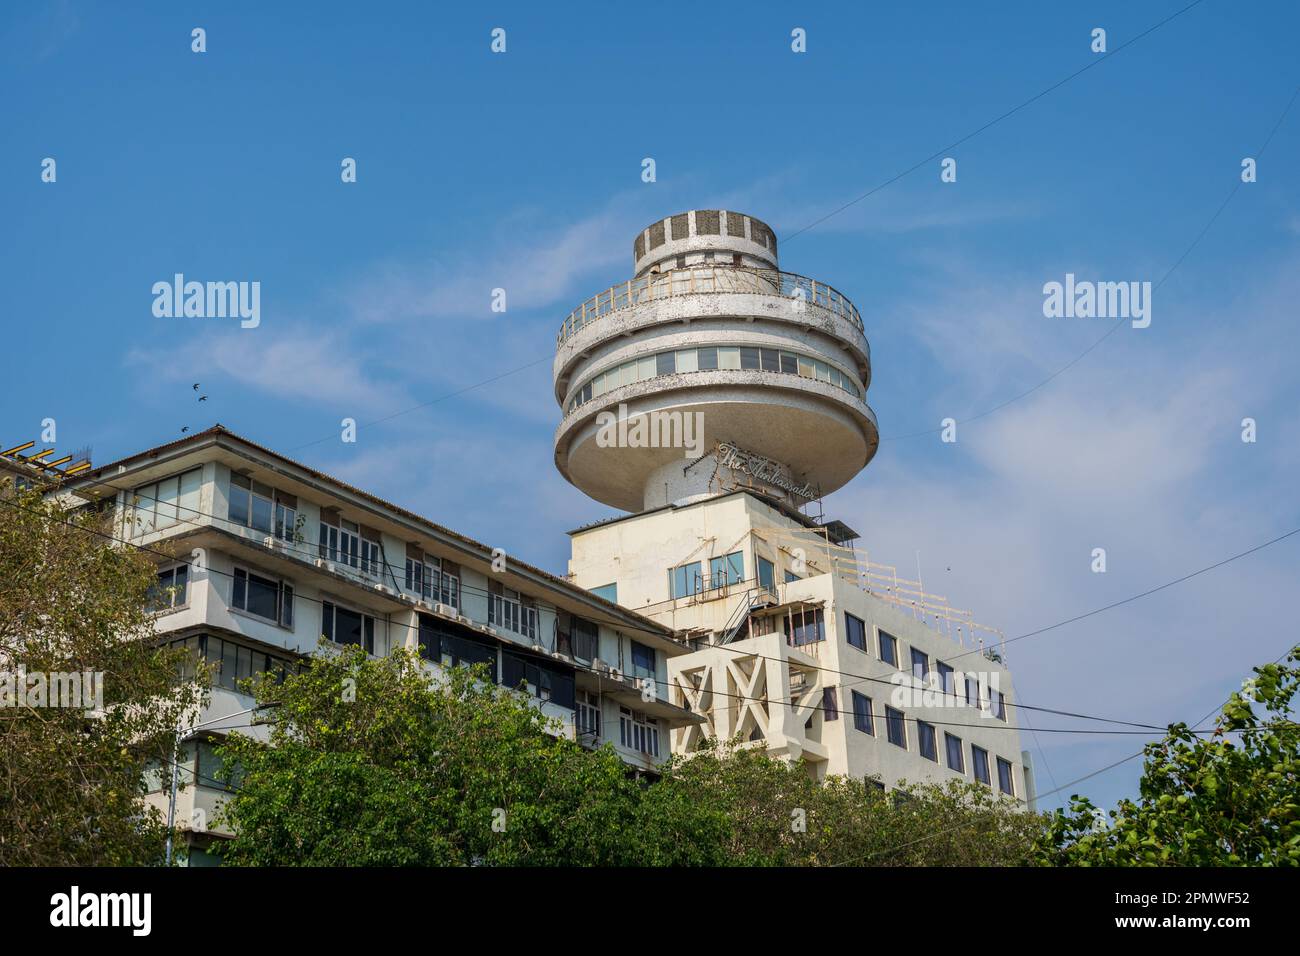 The exterior of the iconic Ambassador Hotel Building at Nariman Point in Mumbai, India Stock Photo